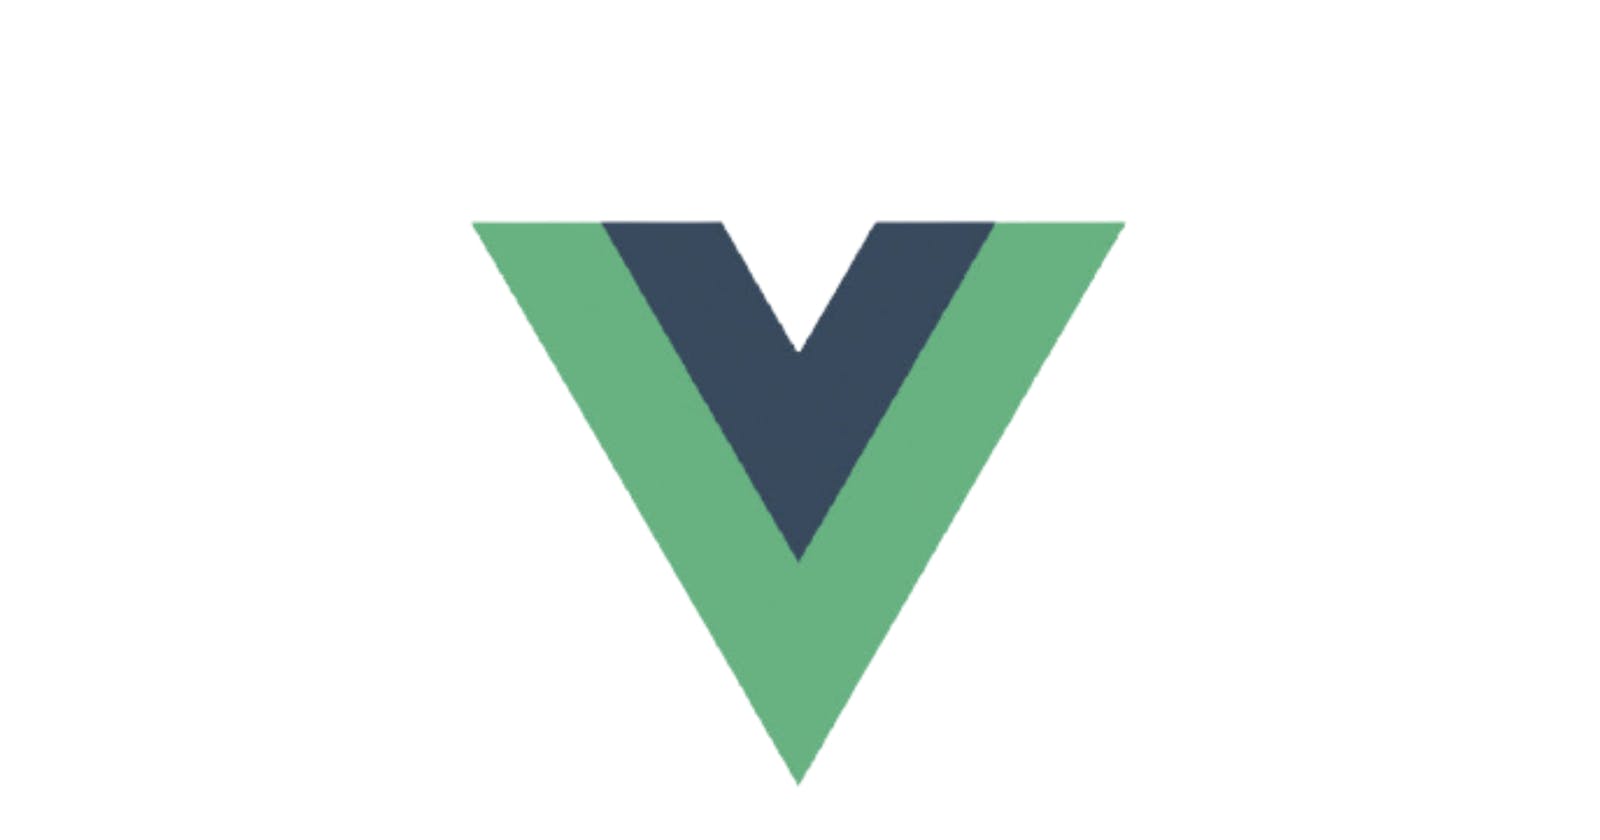 Create Your First Vue App With Real Data